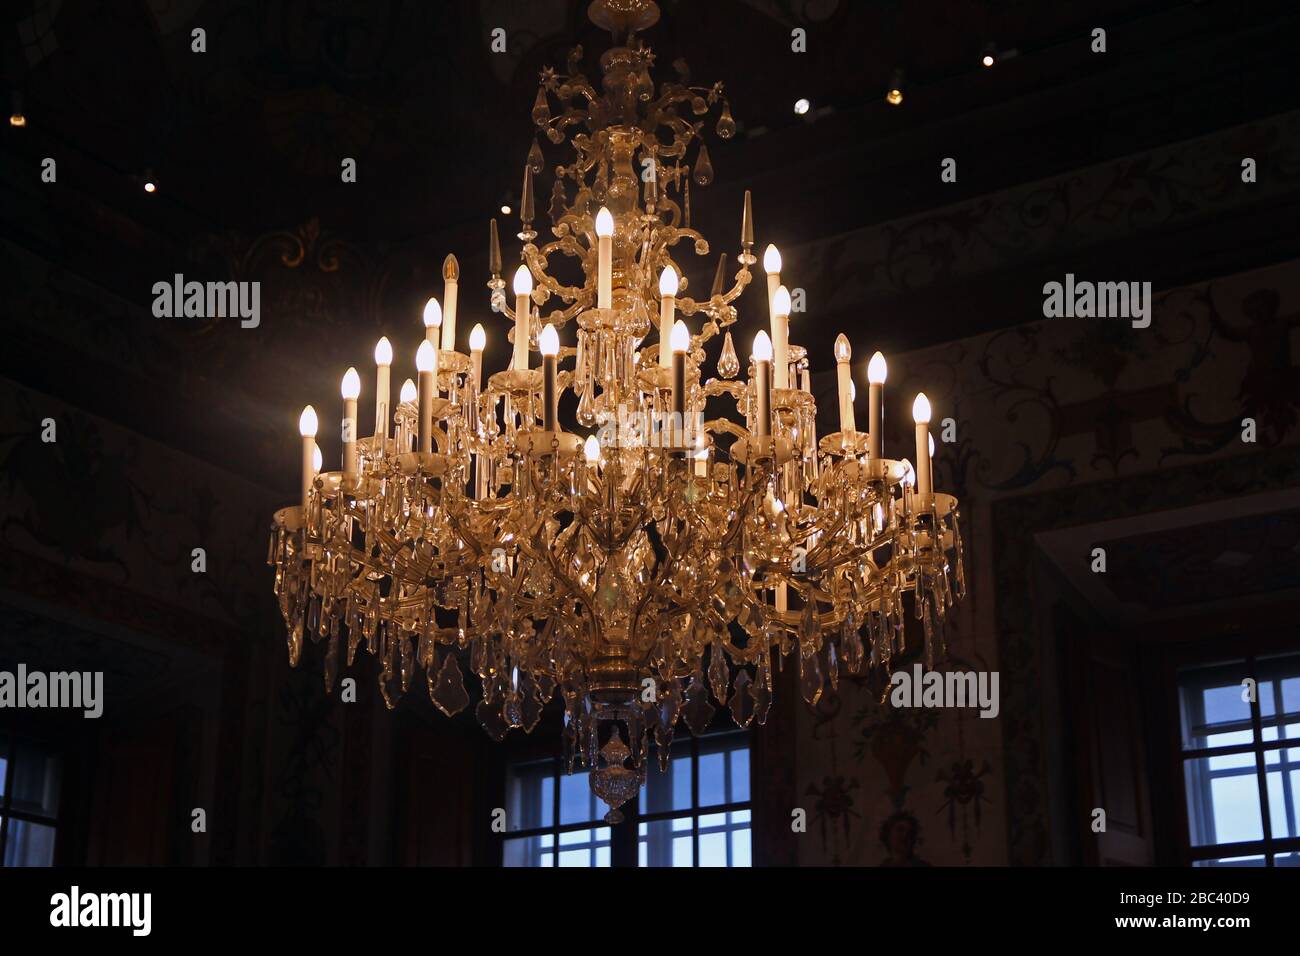 Historic pendant chandelier with lots of lights Stock Photo